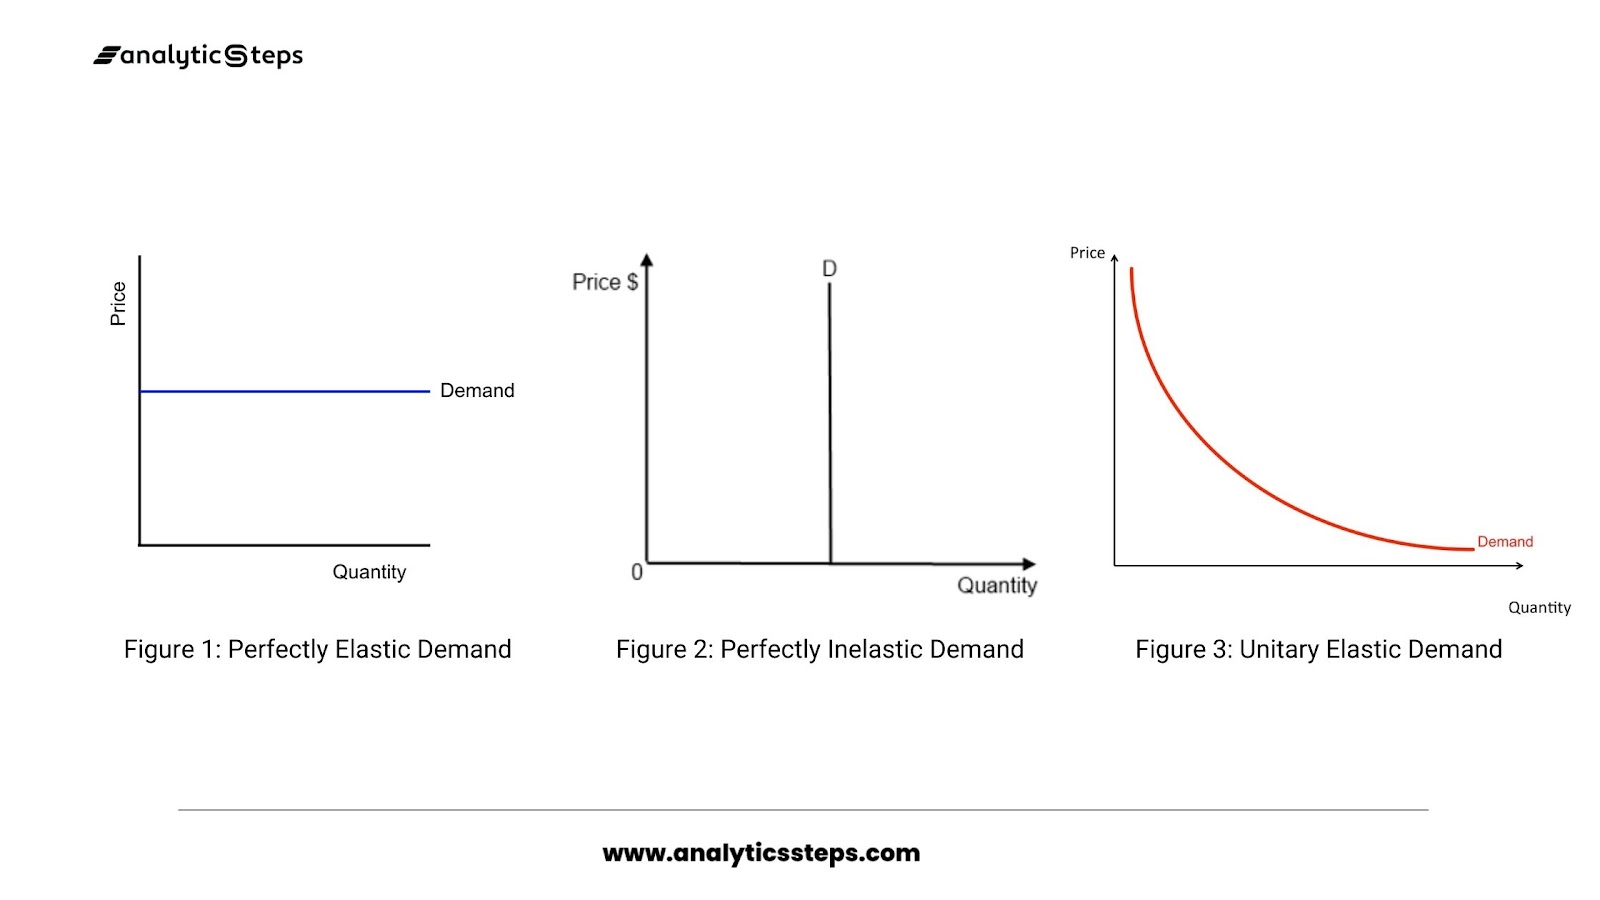 Demand curves for perfectly elastic, perfectly inelastic, and unitary elastic demand.